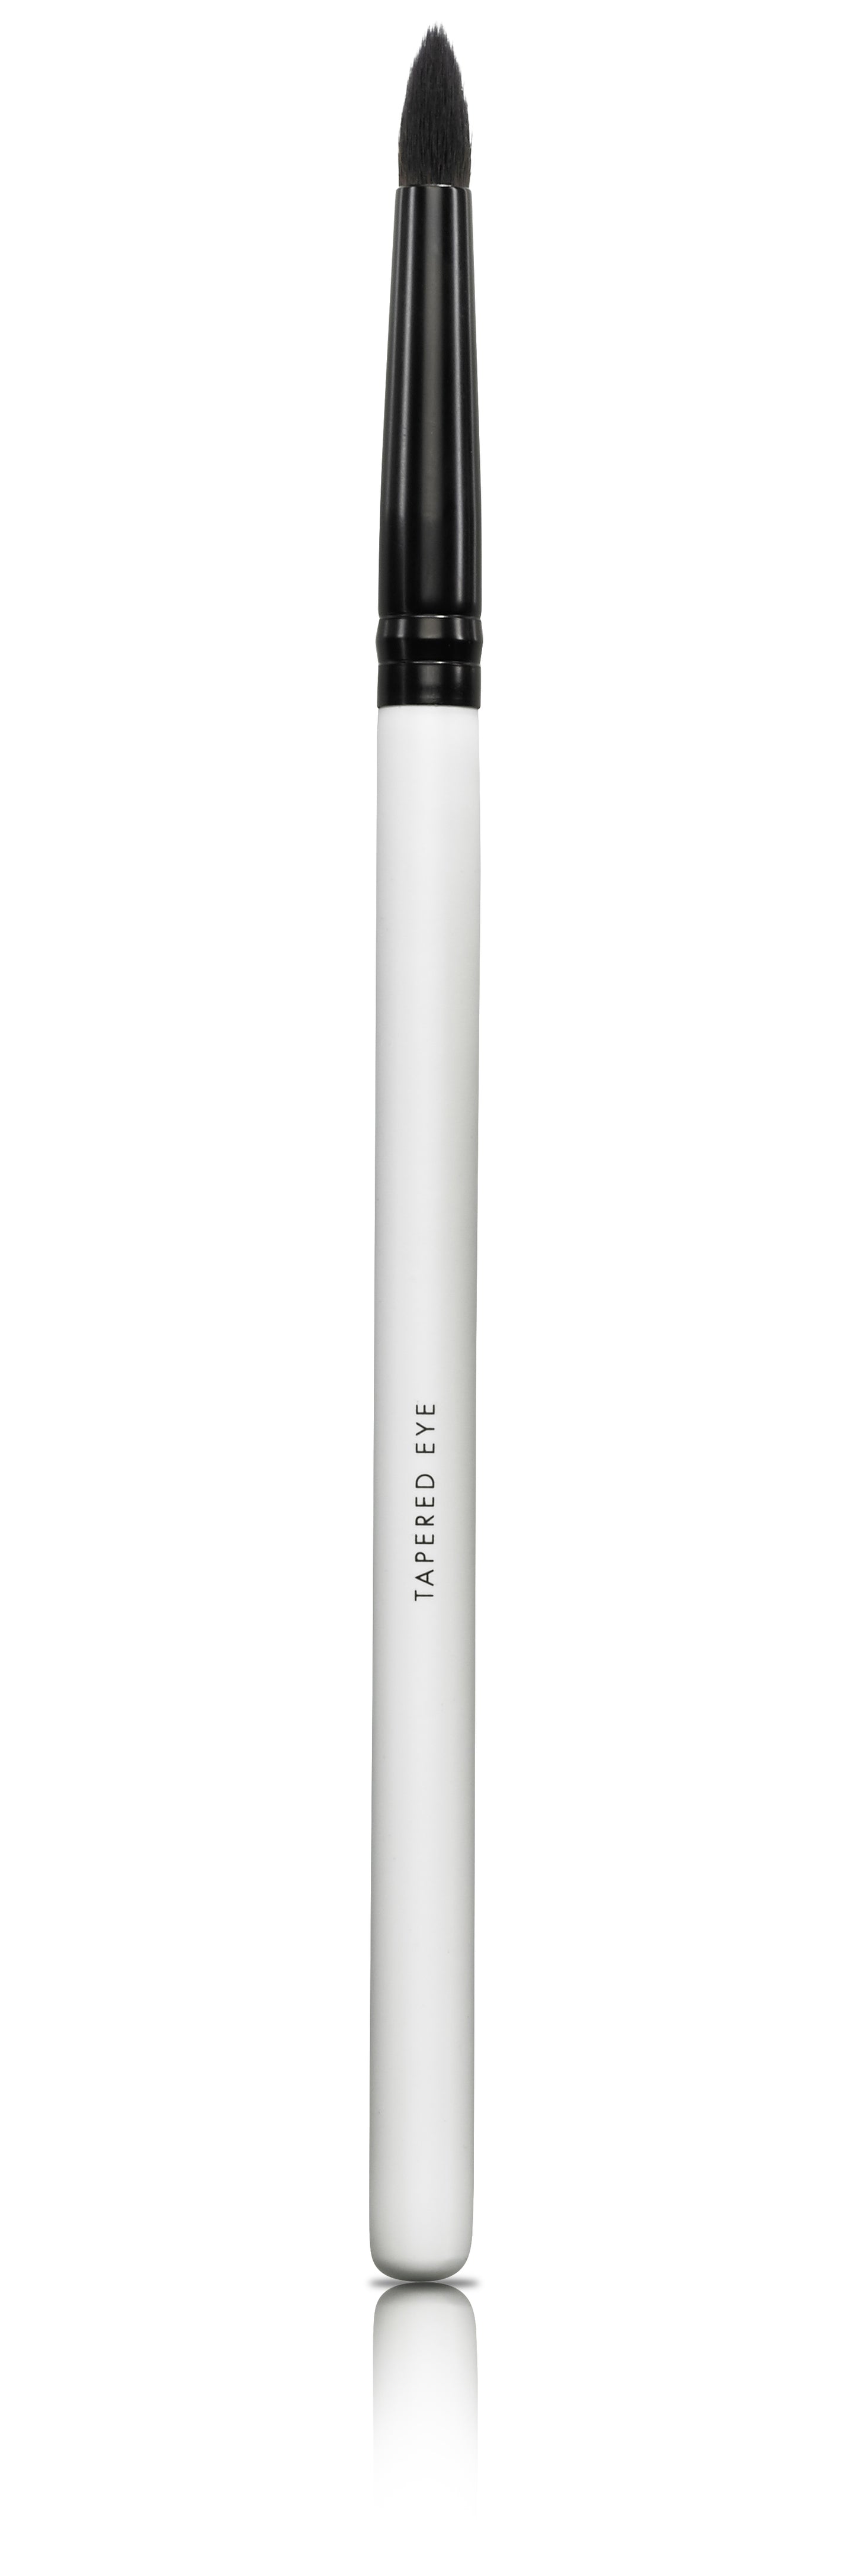 LILY LOLO - Tapered Eye Brush - 1st